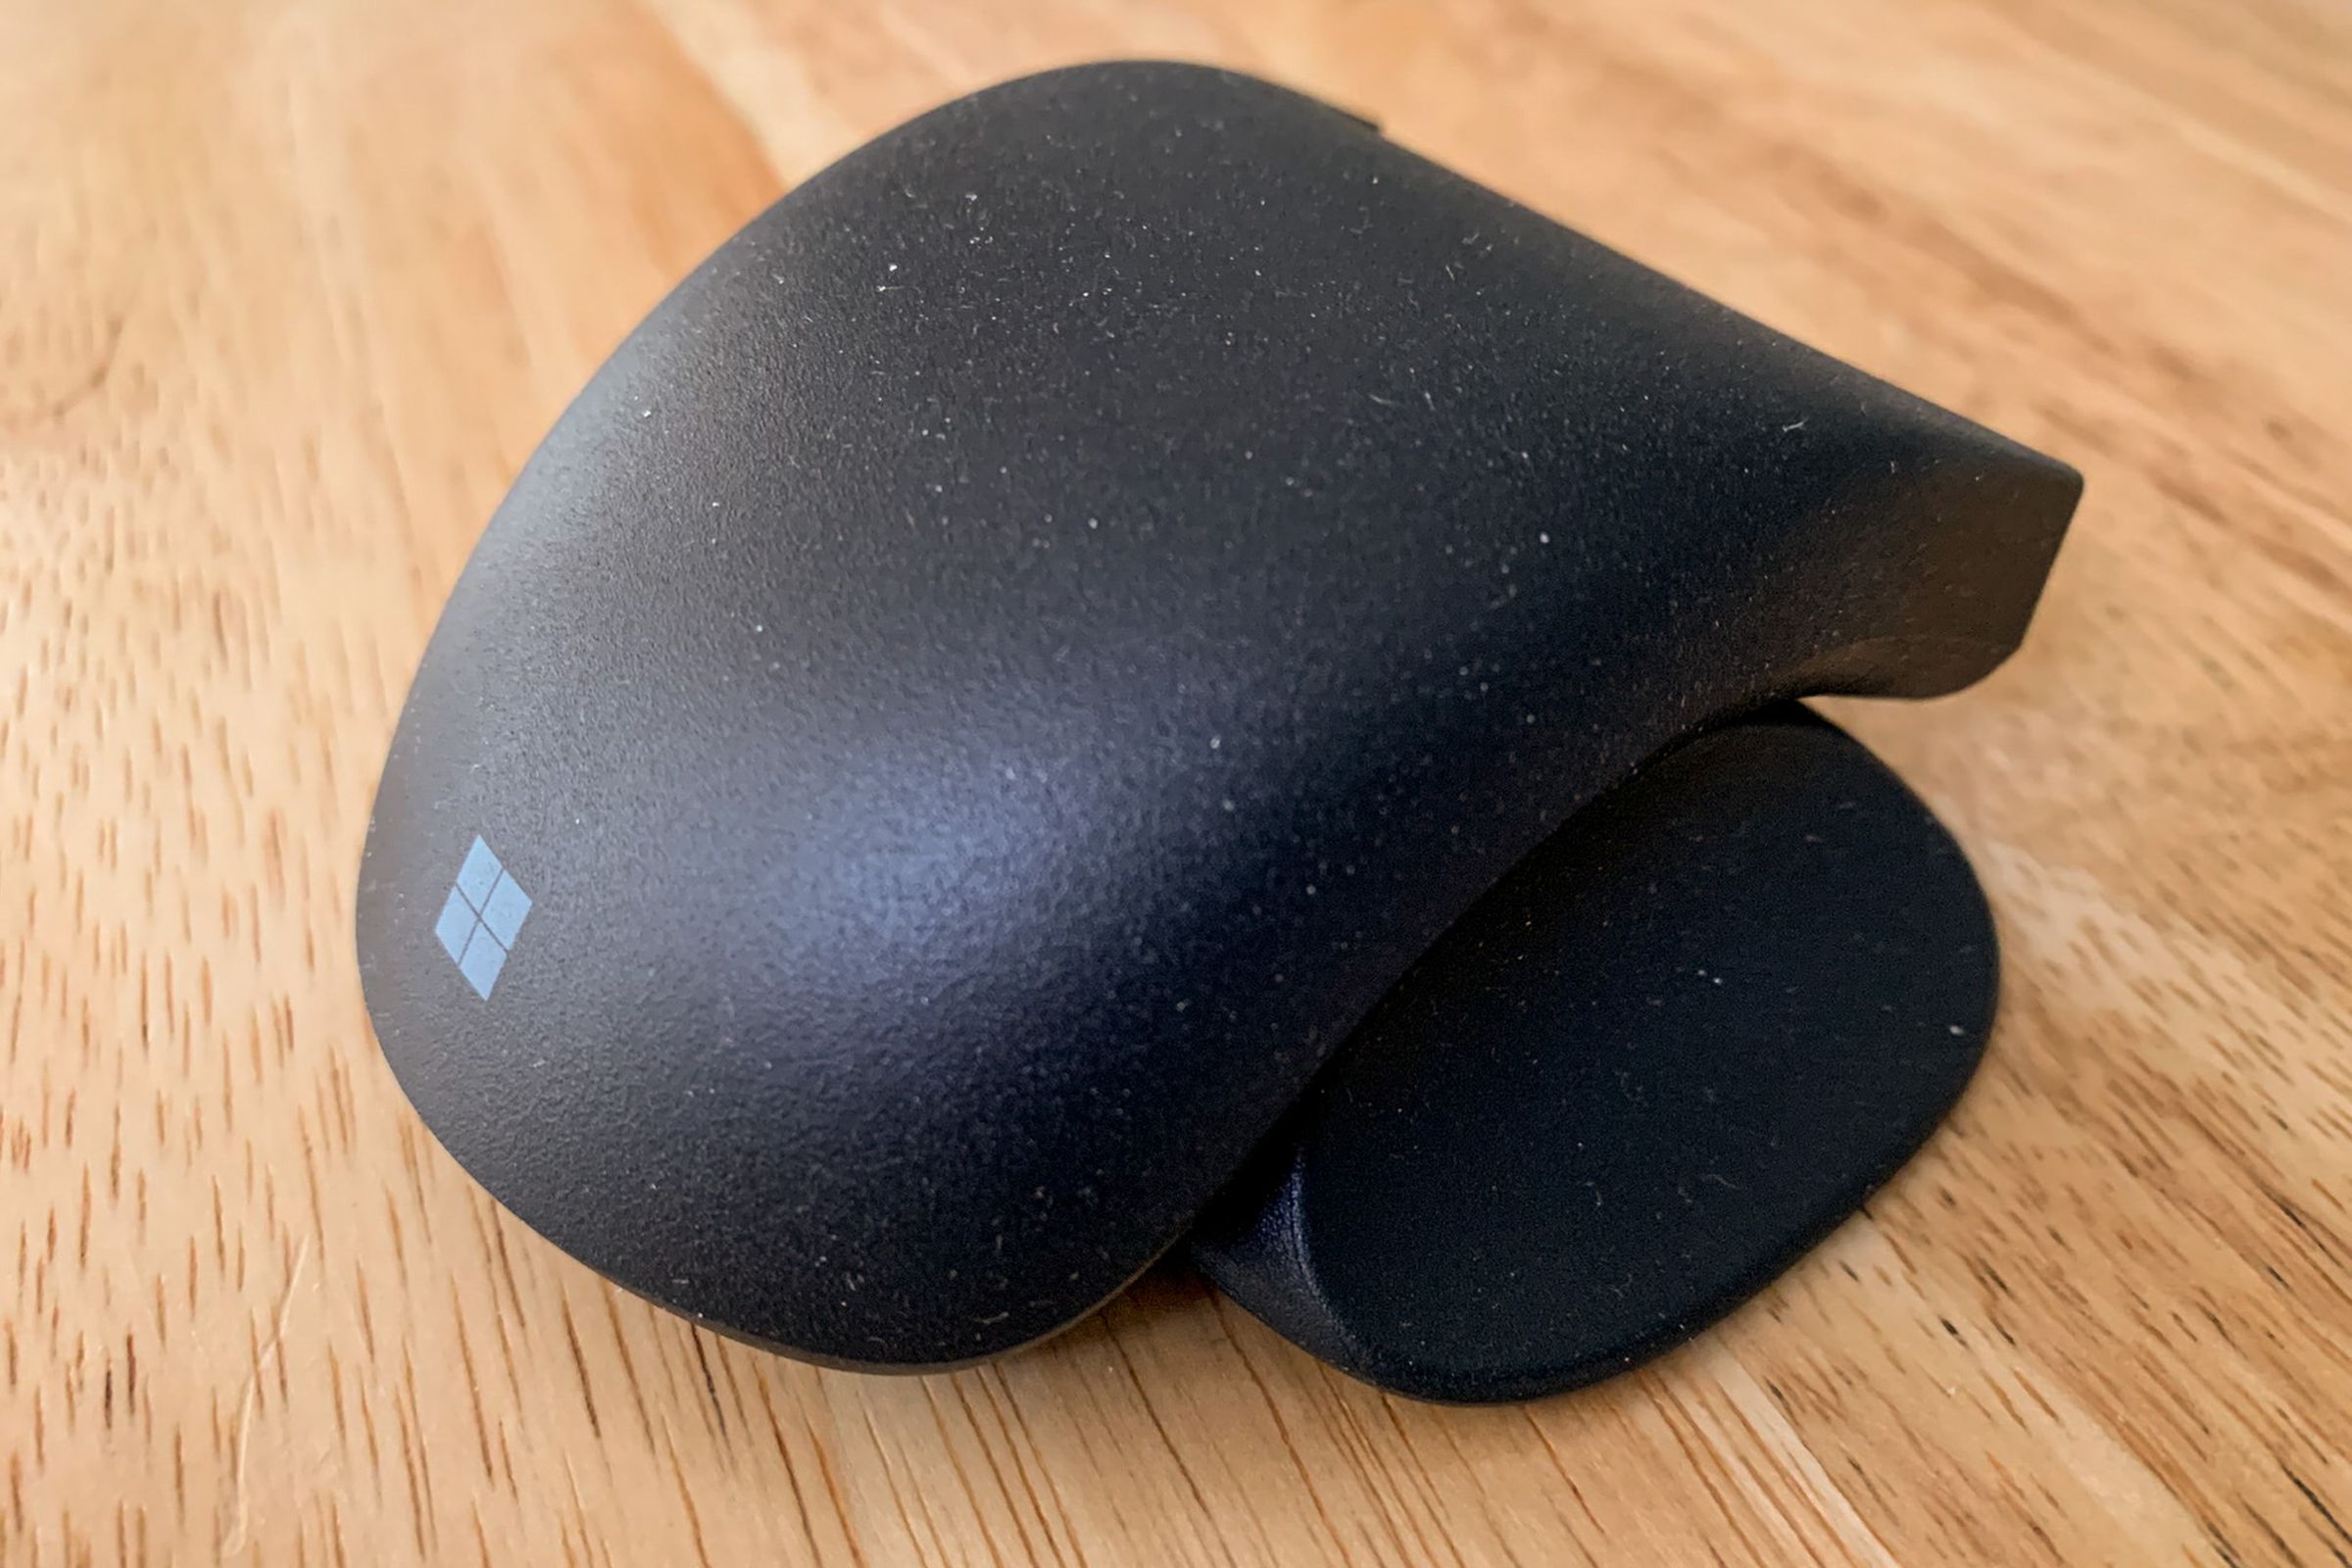 Closeup of black Adaptive Mouse with thumb support.